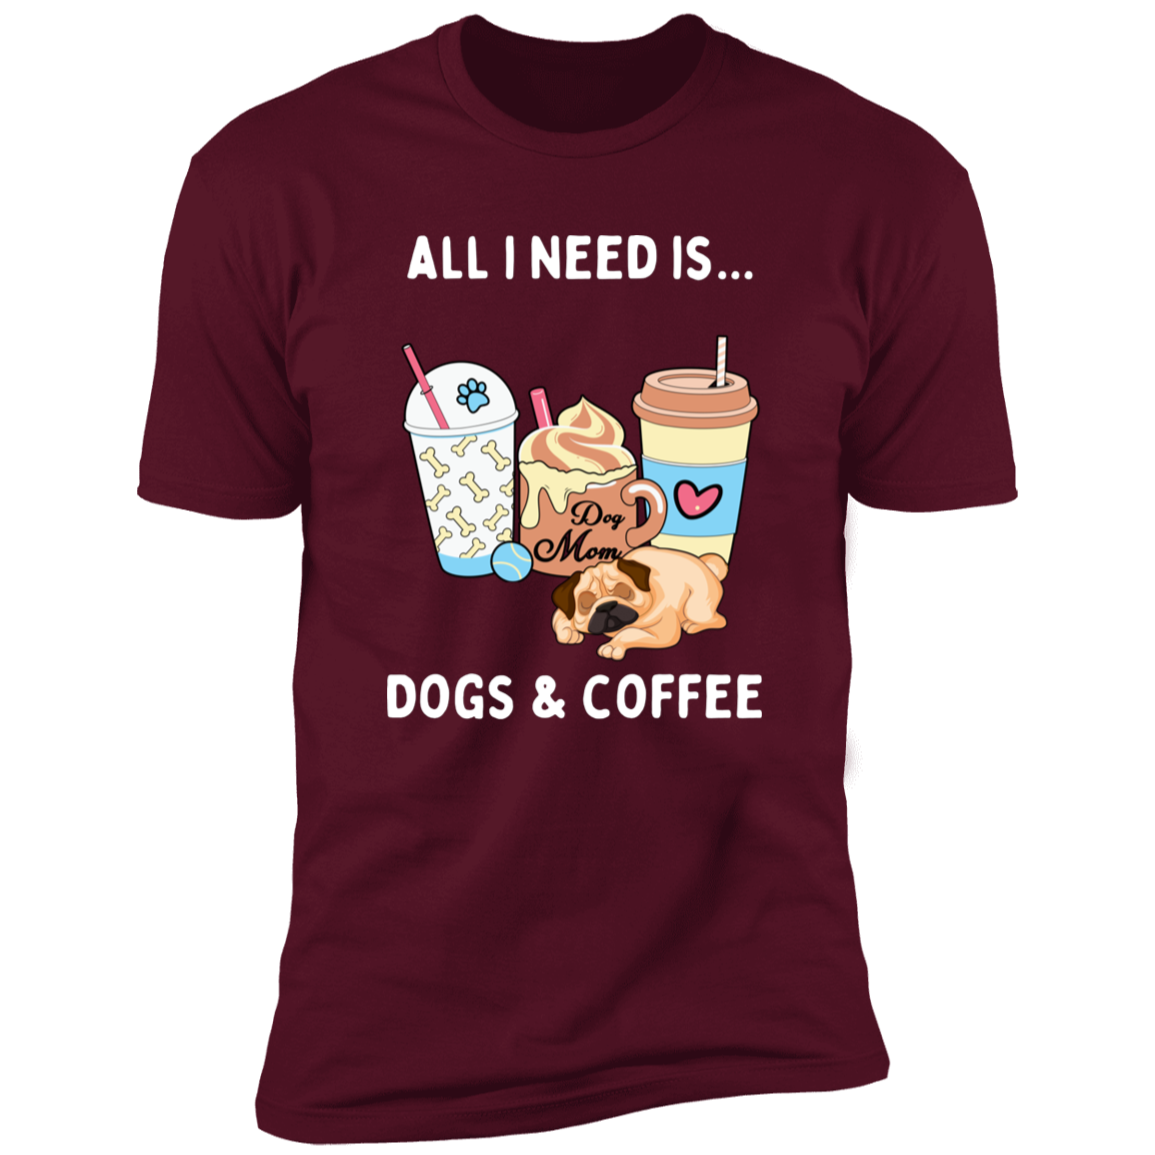 All I Need is Dogs and Coffee, Dog shirt for humas, in maroon